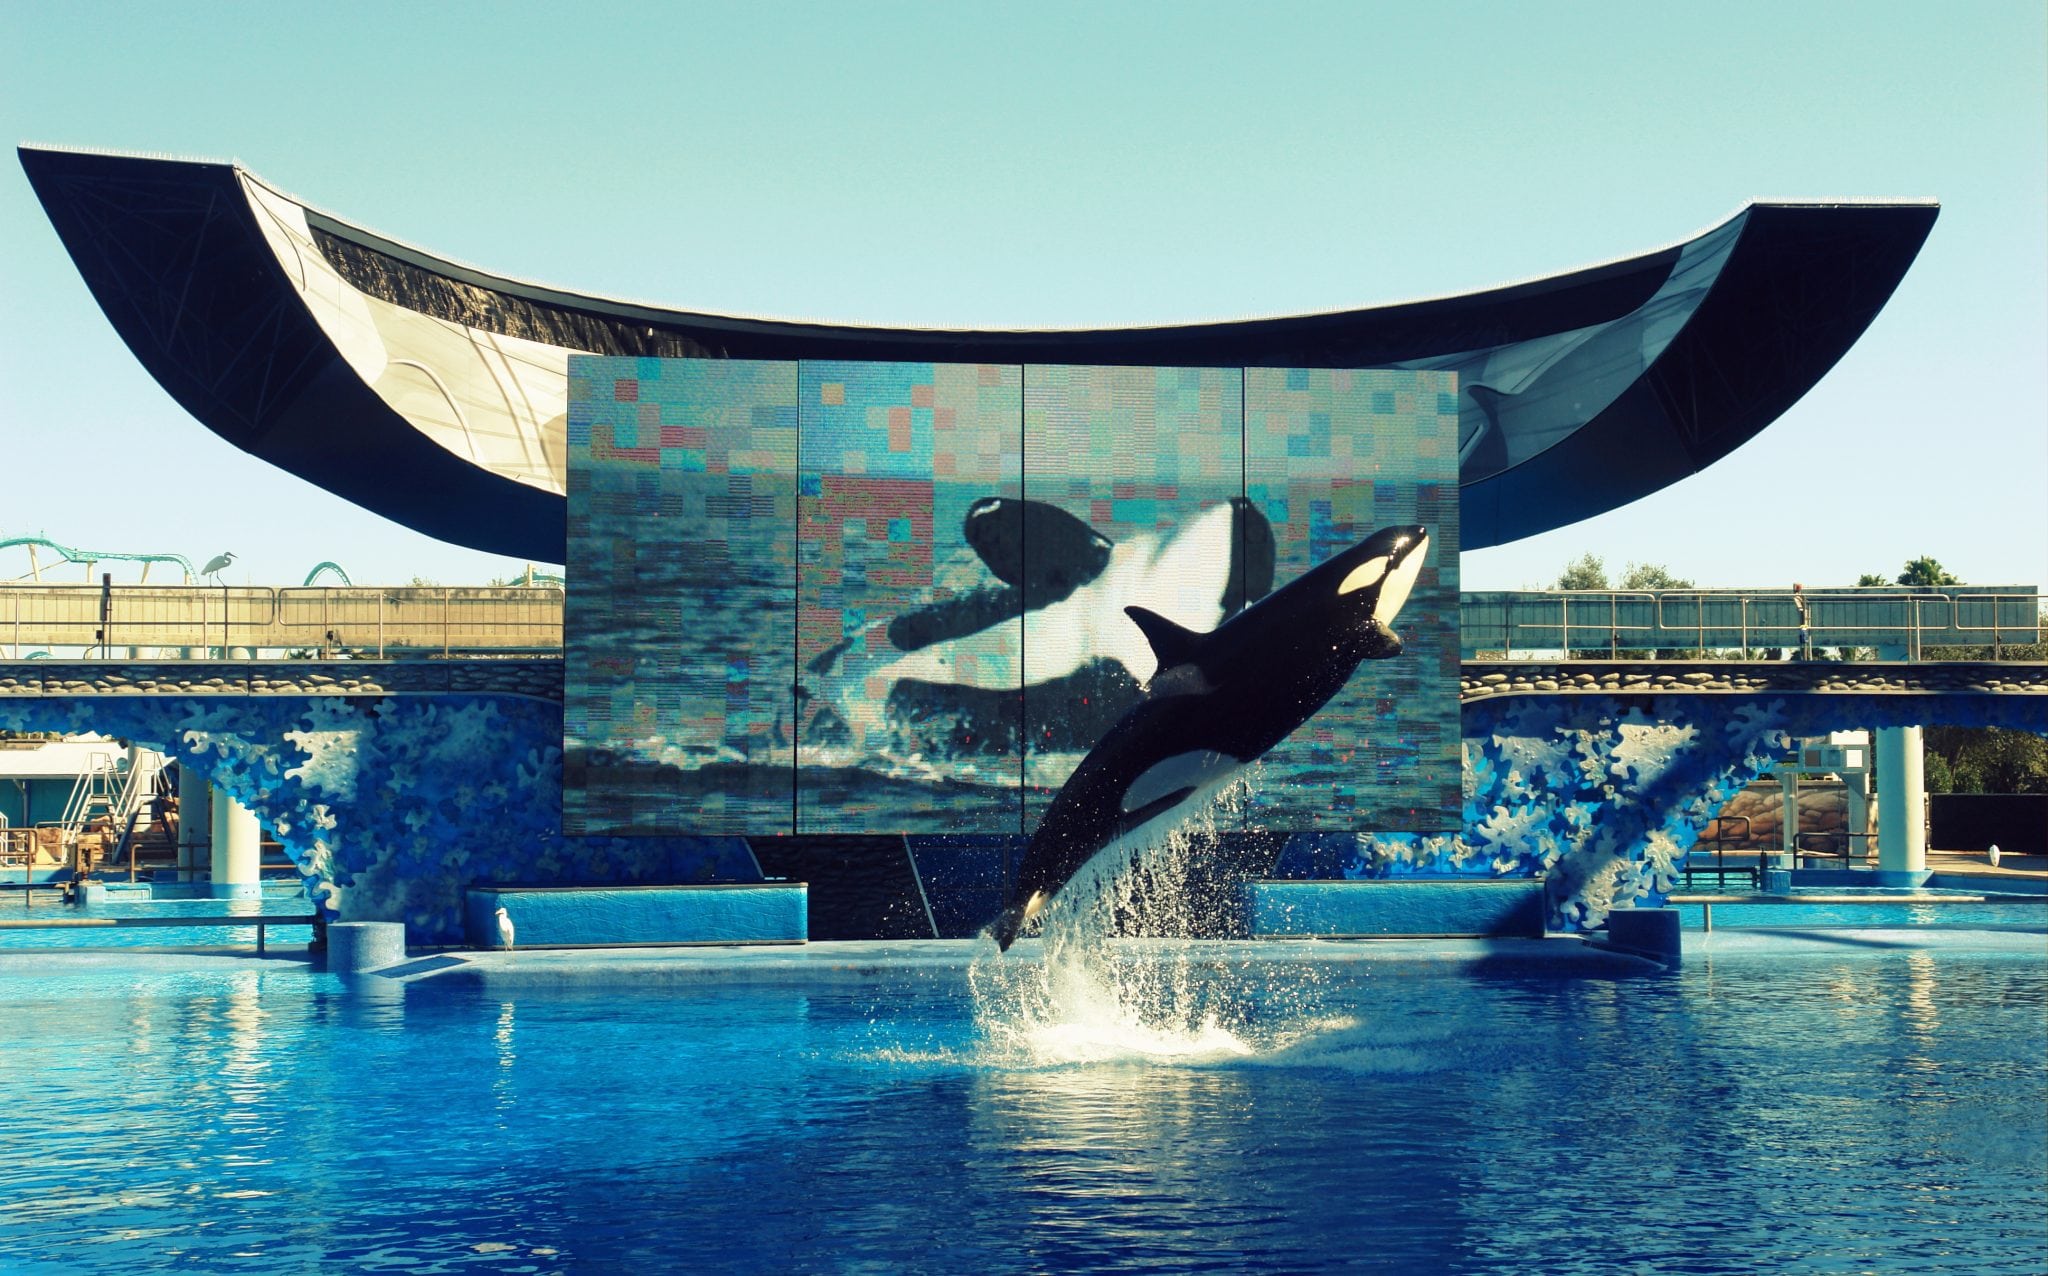 Seaworld may have less to worry than what the media controversy says , at least for now.